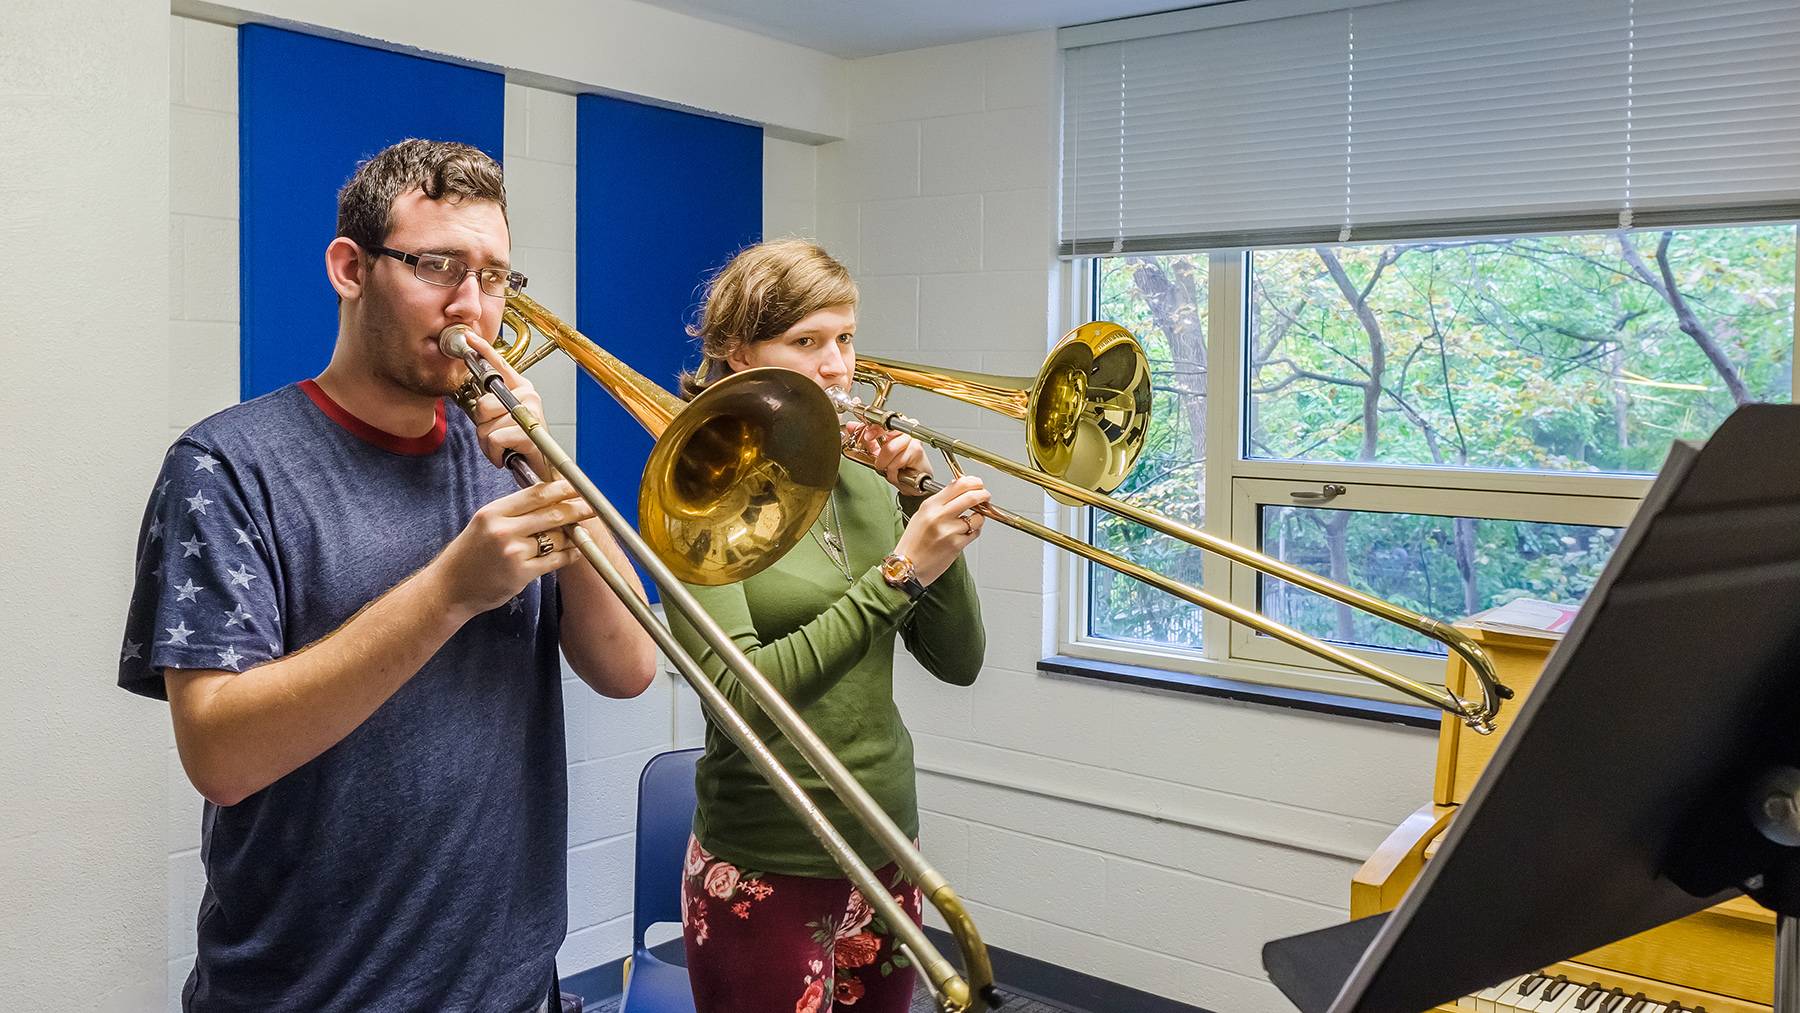 Two UNCG students stand next to a piano while both playing trombones.